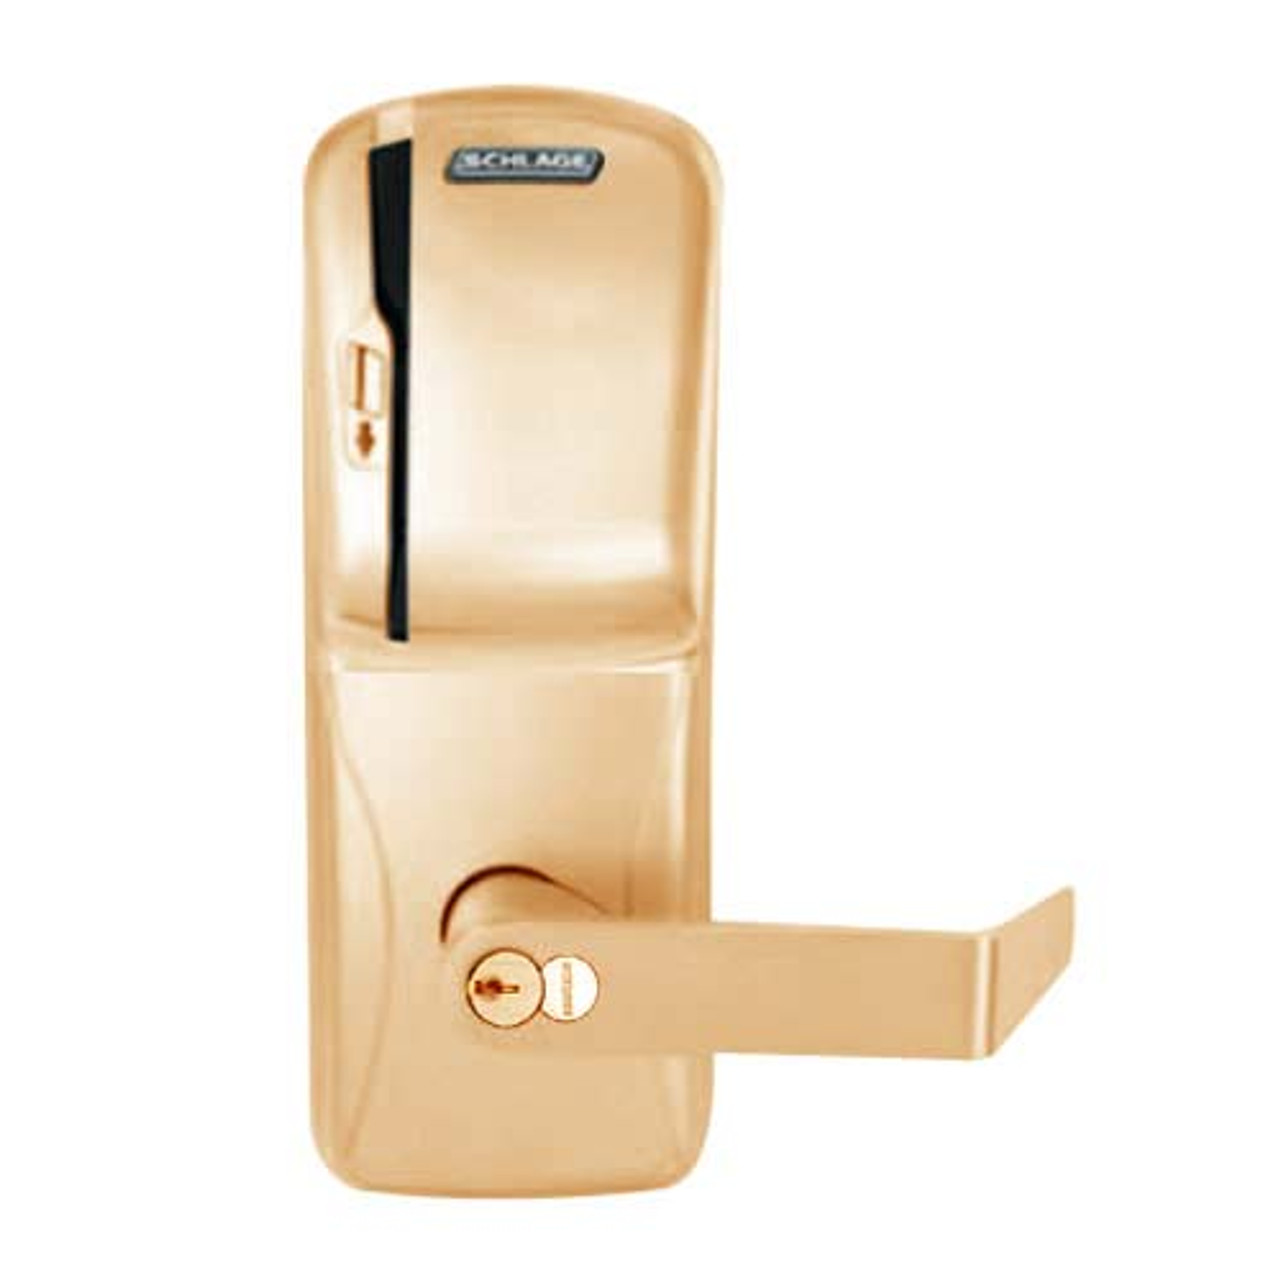 CO200-CY-70-MS-RHO-RD-612 Schlage Standalone Cylindrical Electronic Magnetic Stripe Reader Locks in Satin Bronze